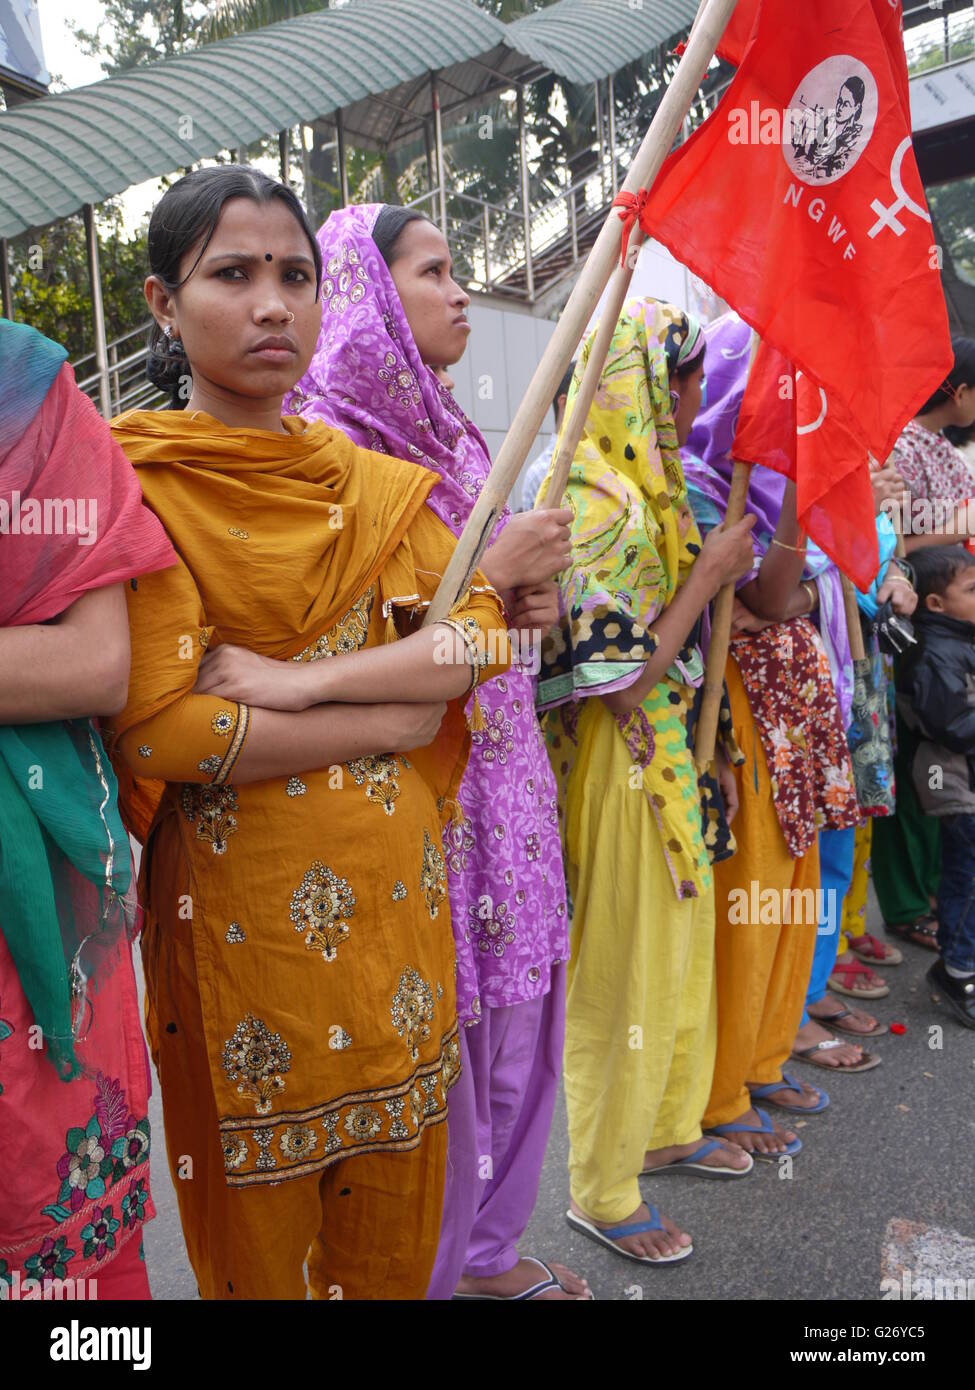 Women working in garment sector in Bangladesh demonstrate for better working conditions in Dhaka Stock Photo